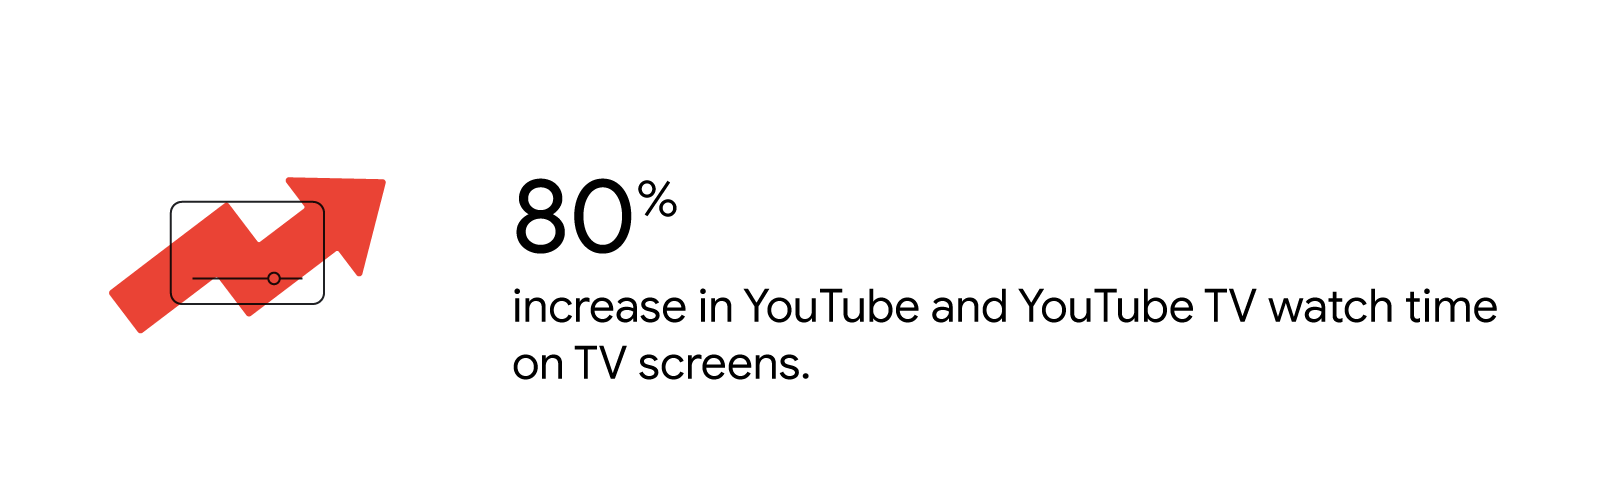 An illustrated video screen icon represents the statistic that there has been an 80% increase in YouTube and YouTube TV watch time on TV screens.